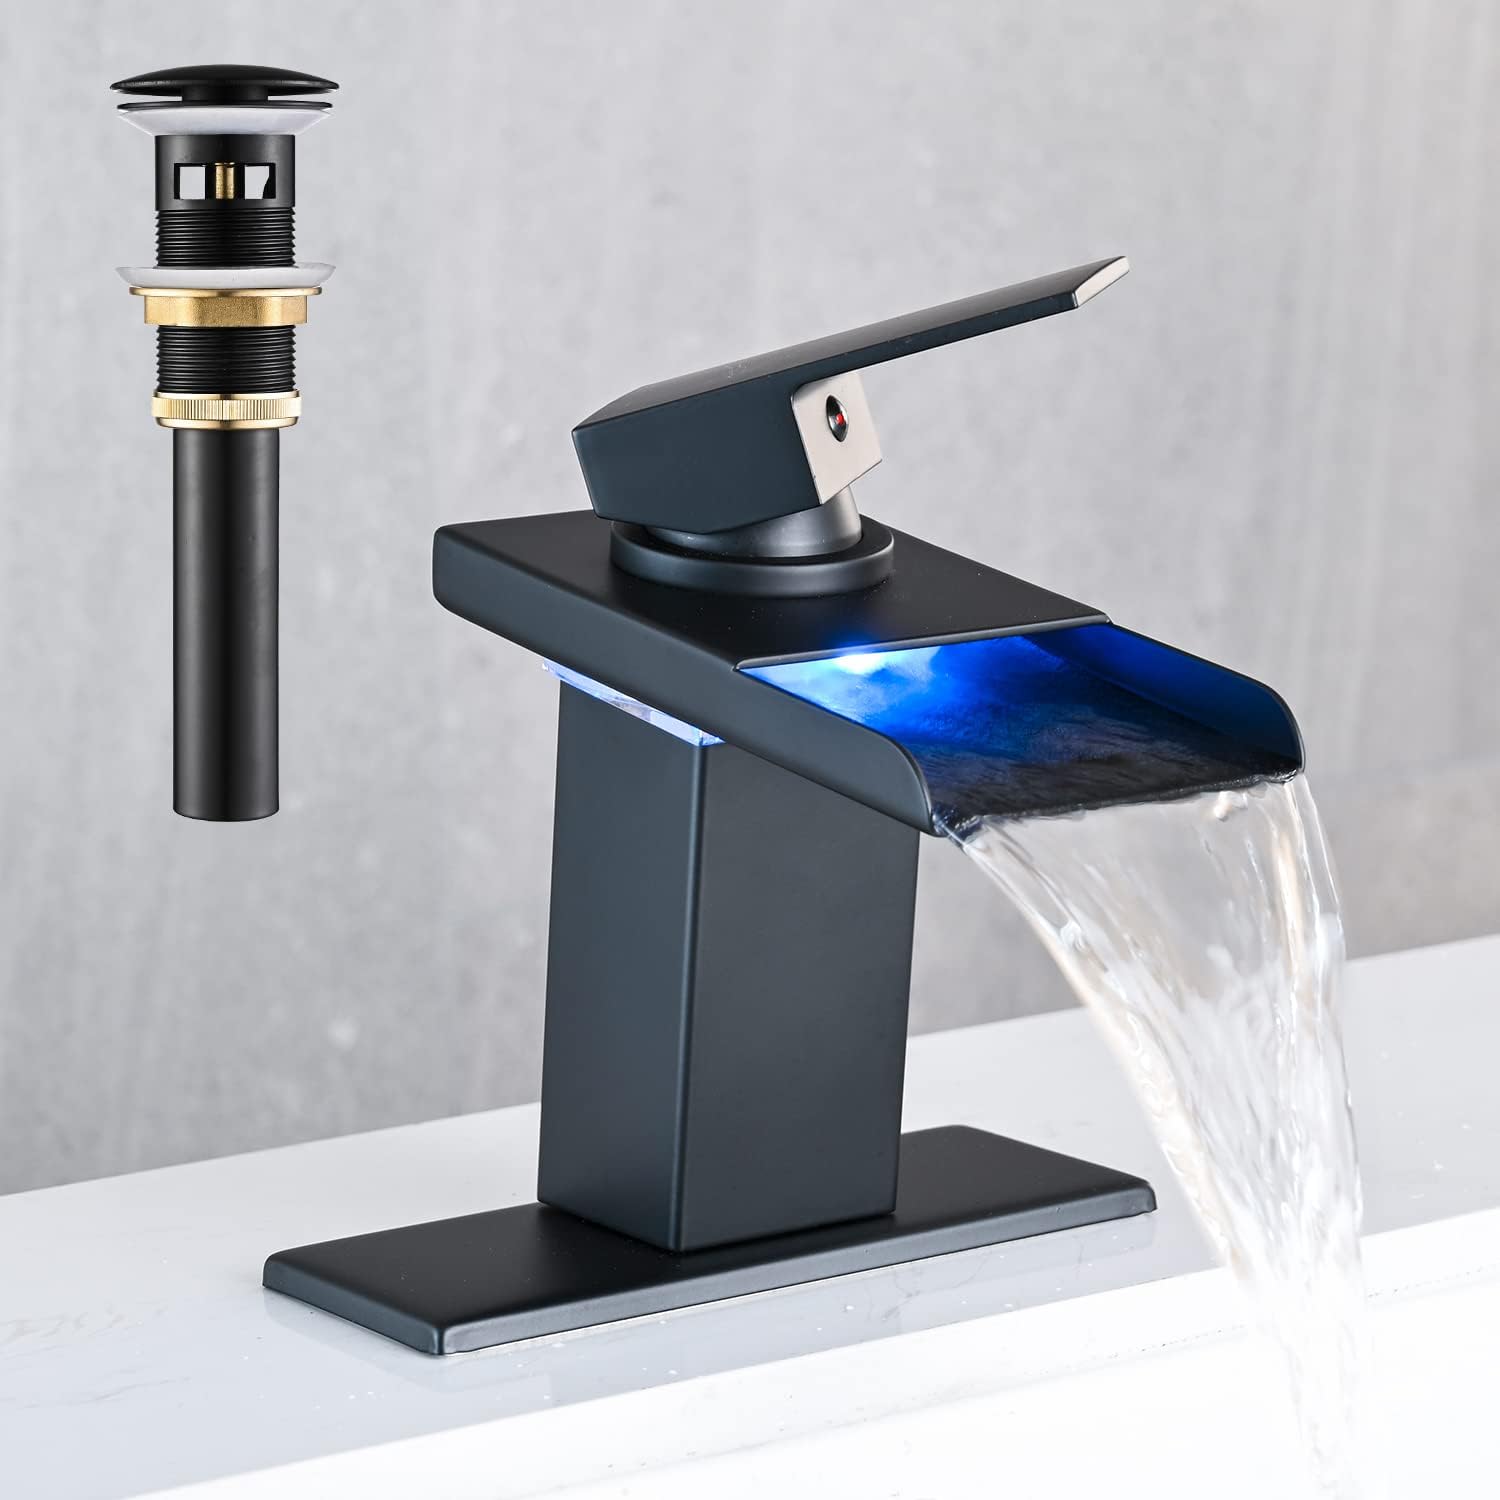 LED Bathroom Sink Faucet, Matte Black Waterfall Single Hole Handle Vanity Faucets for Sinks 1 Hole with Metal Pop Up Drain and 2 Water Supply Lines, Stainless Steel Spout